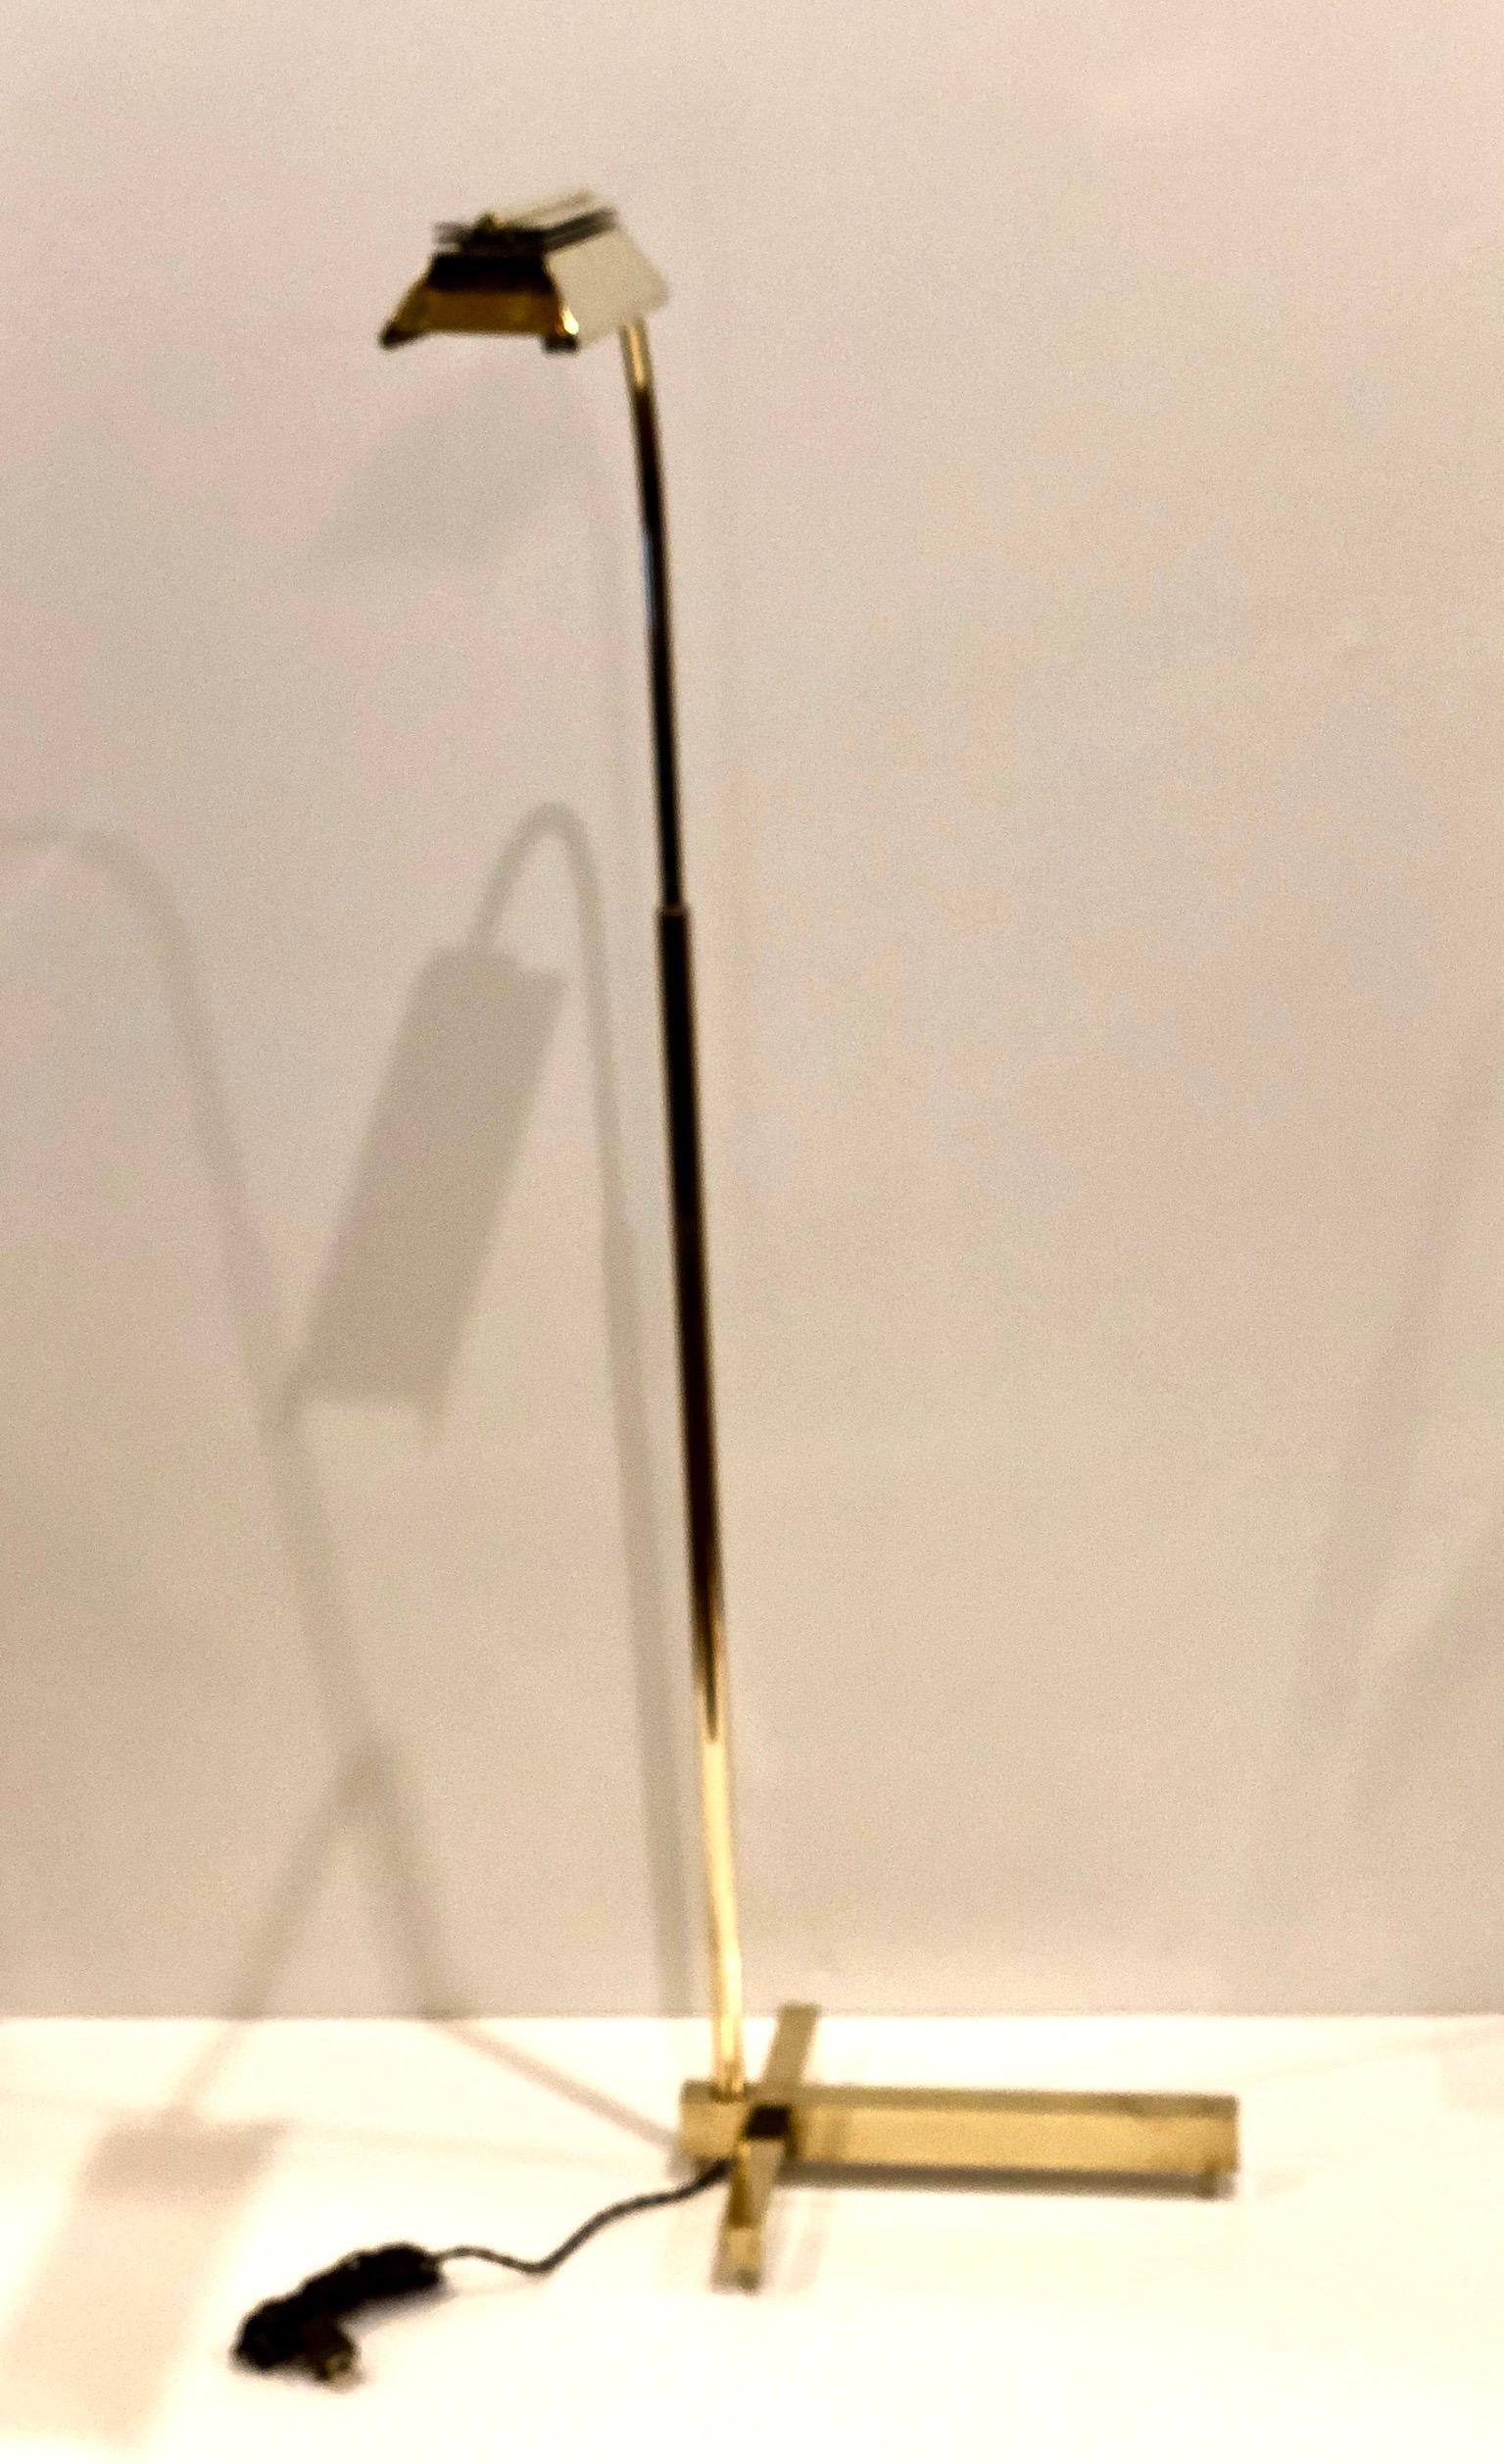 Elegant floor lamp in a polished brass finish by Casella Lighting, circa 1980s. The lamp is multi-directional (goes up and down and rotates from side to side) it has been rewired with twisted cloth cord and with a halogen bulb and dimmer switch. The